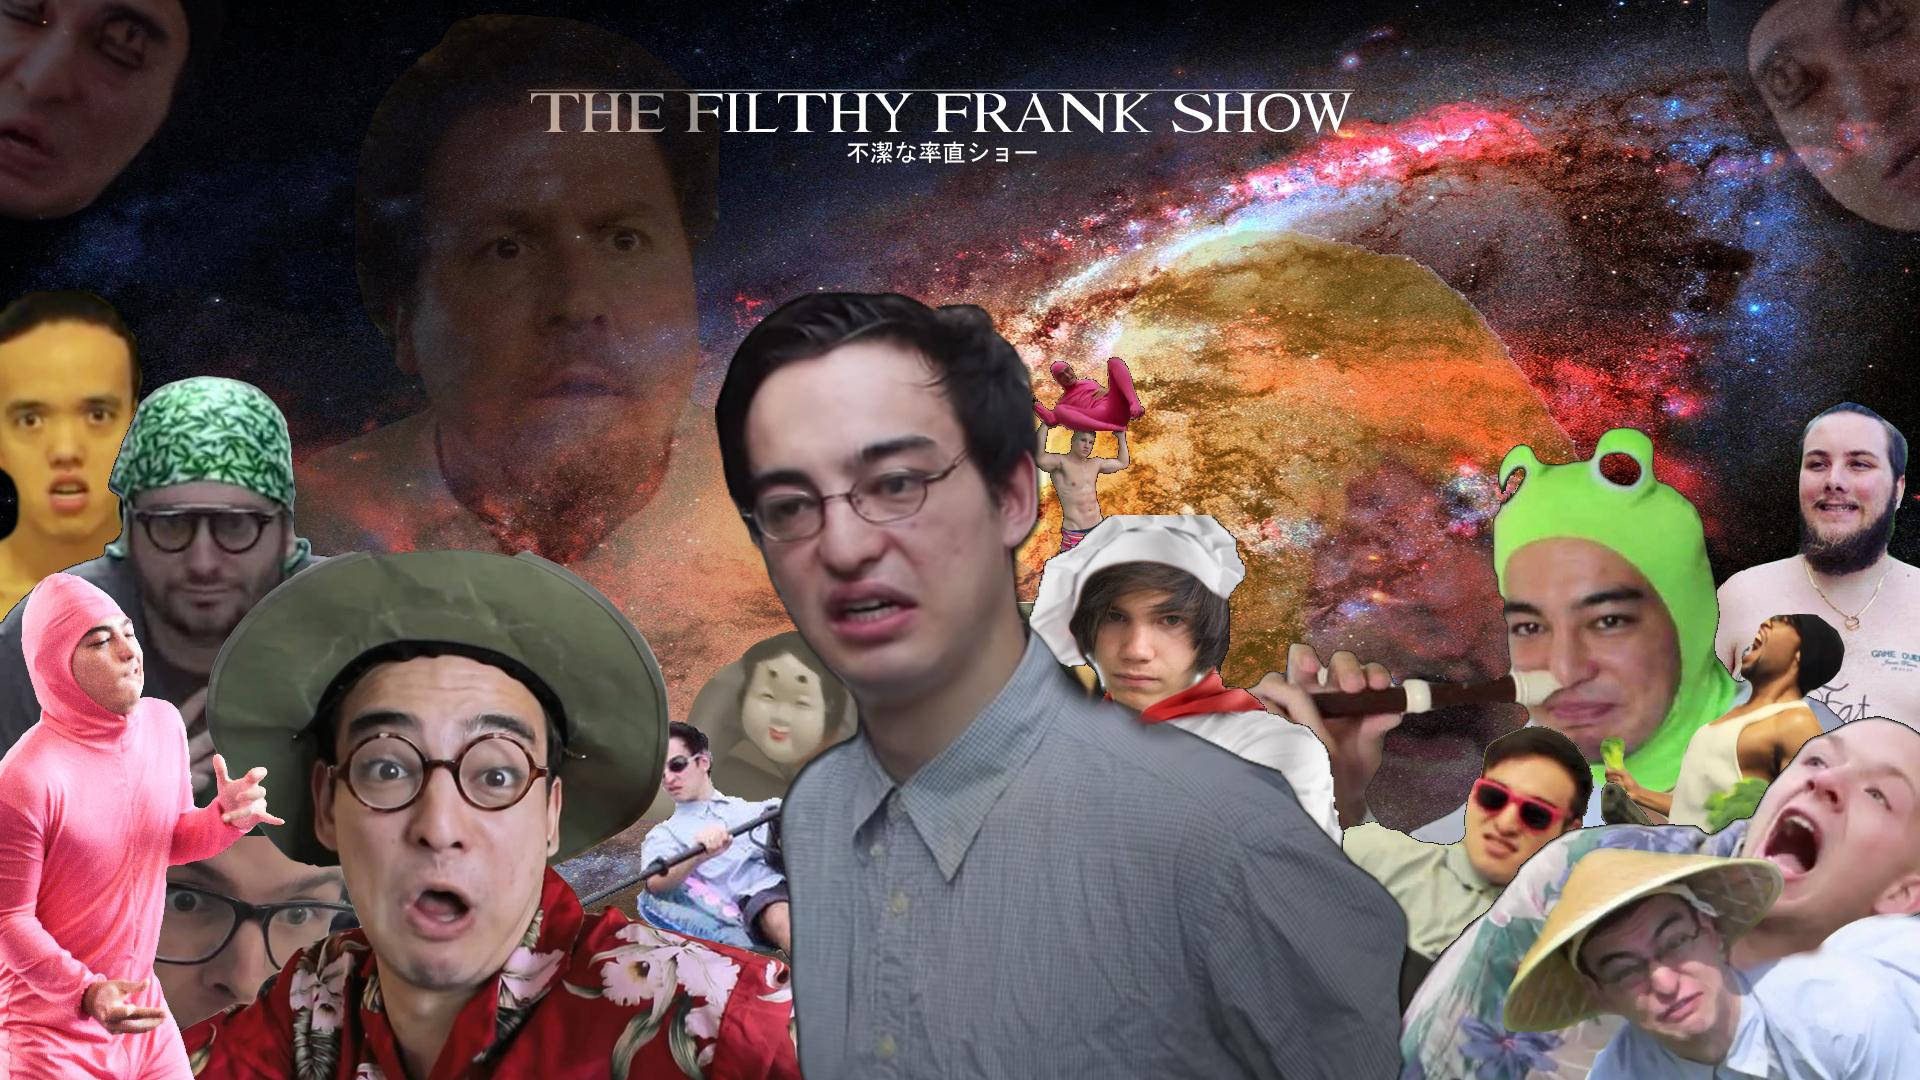 The Filthy Frank Show Youtuber